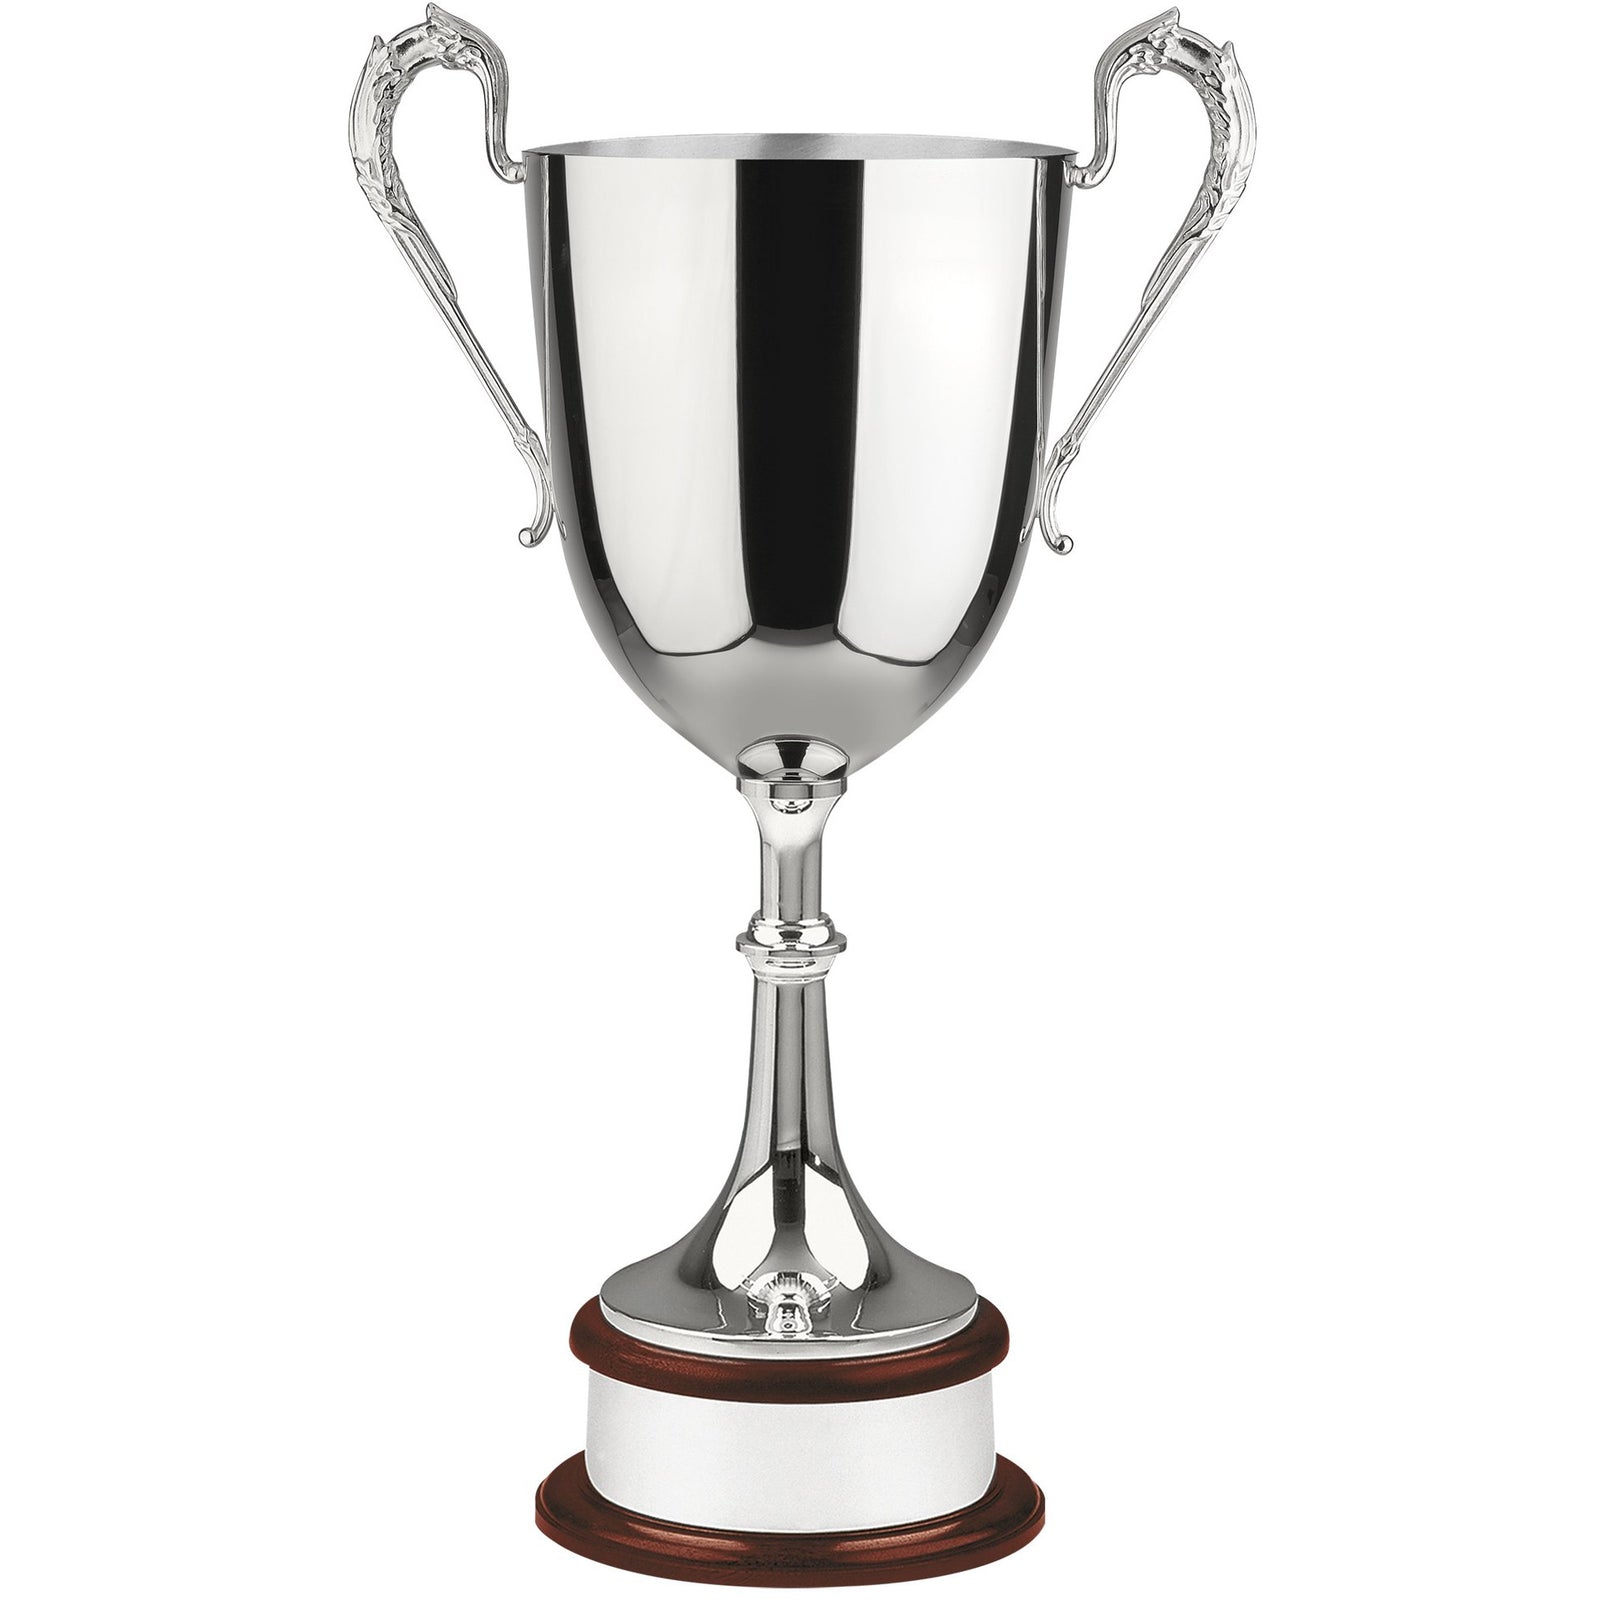 25.5in Nickel Plated Trophy Cup